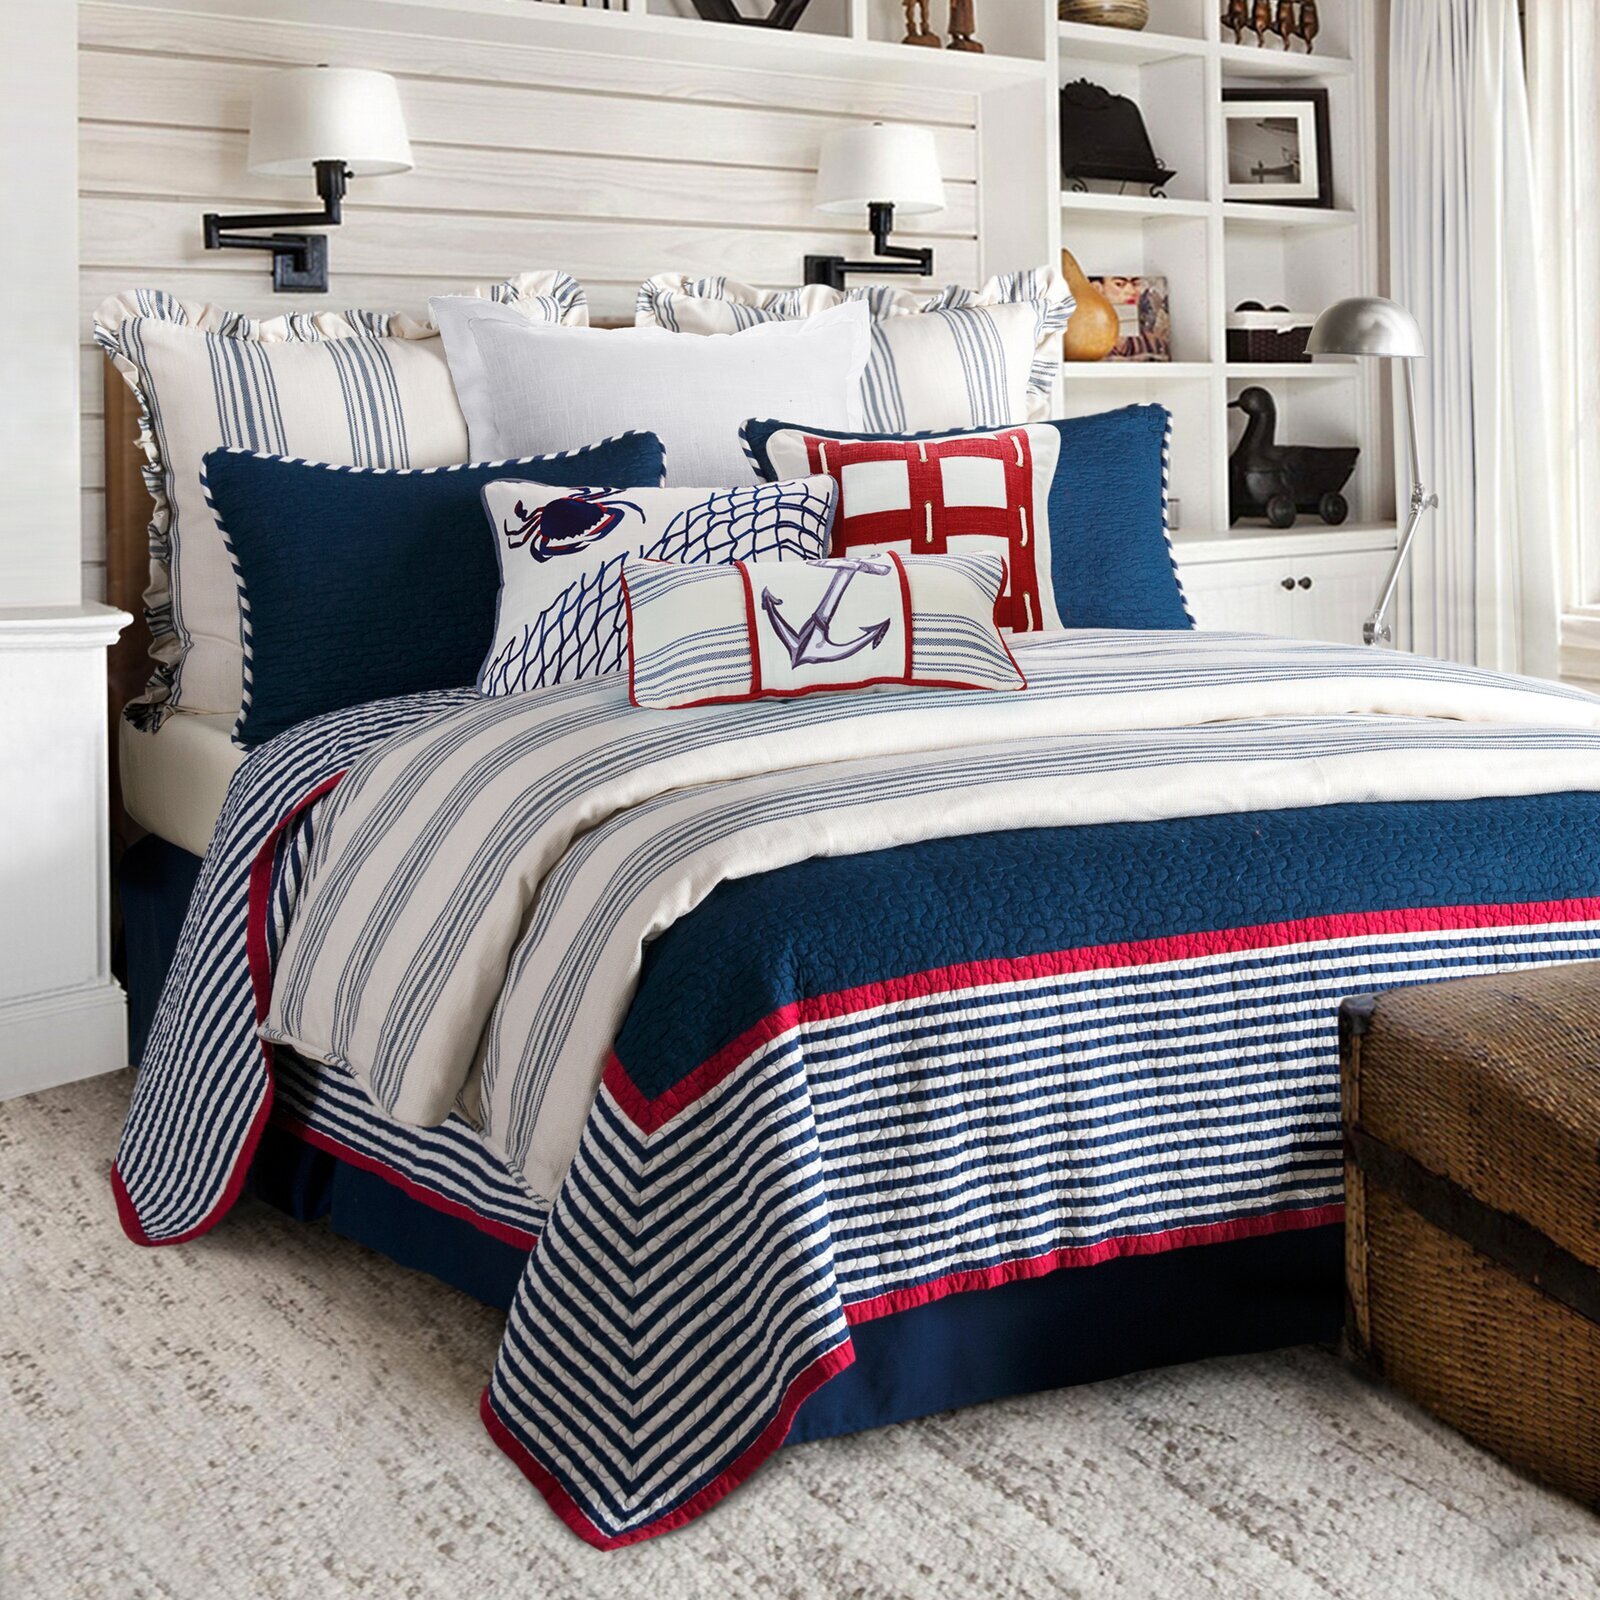 Striped Nautical Quilt Pattern